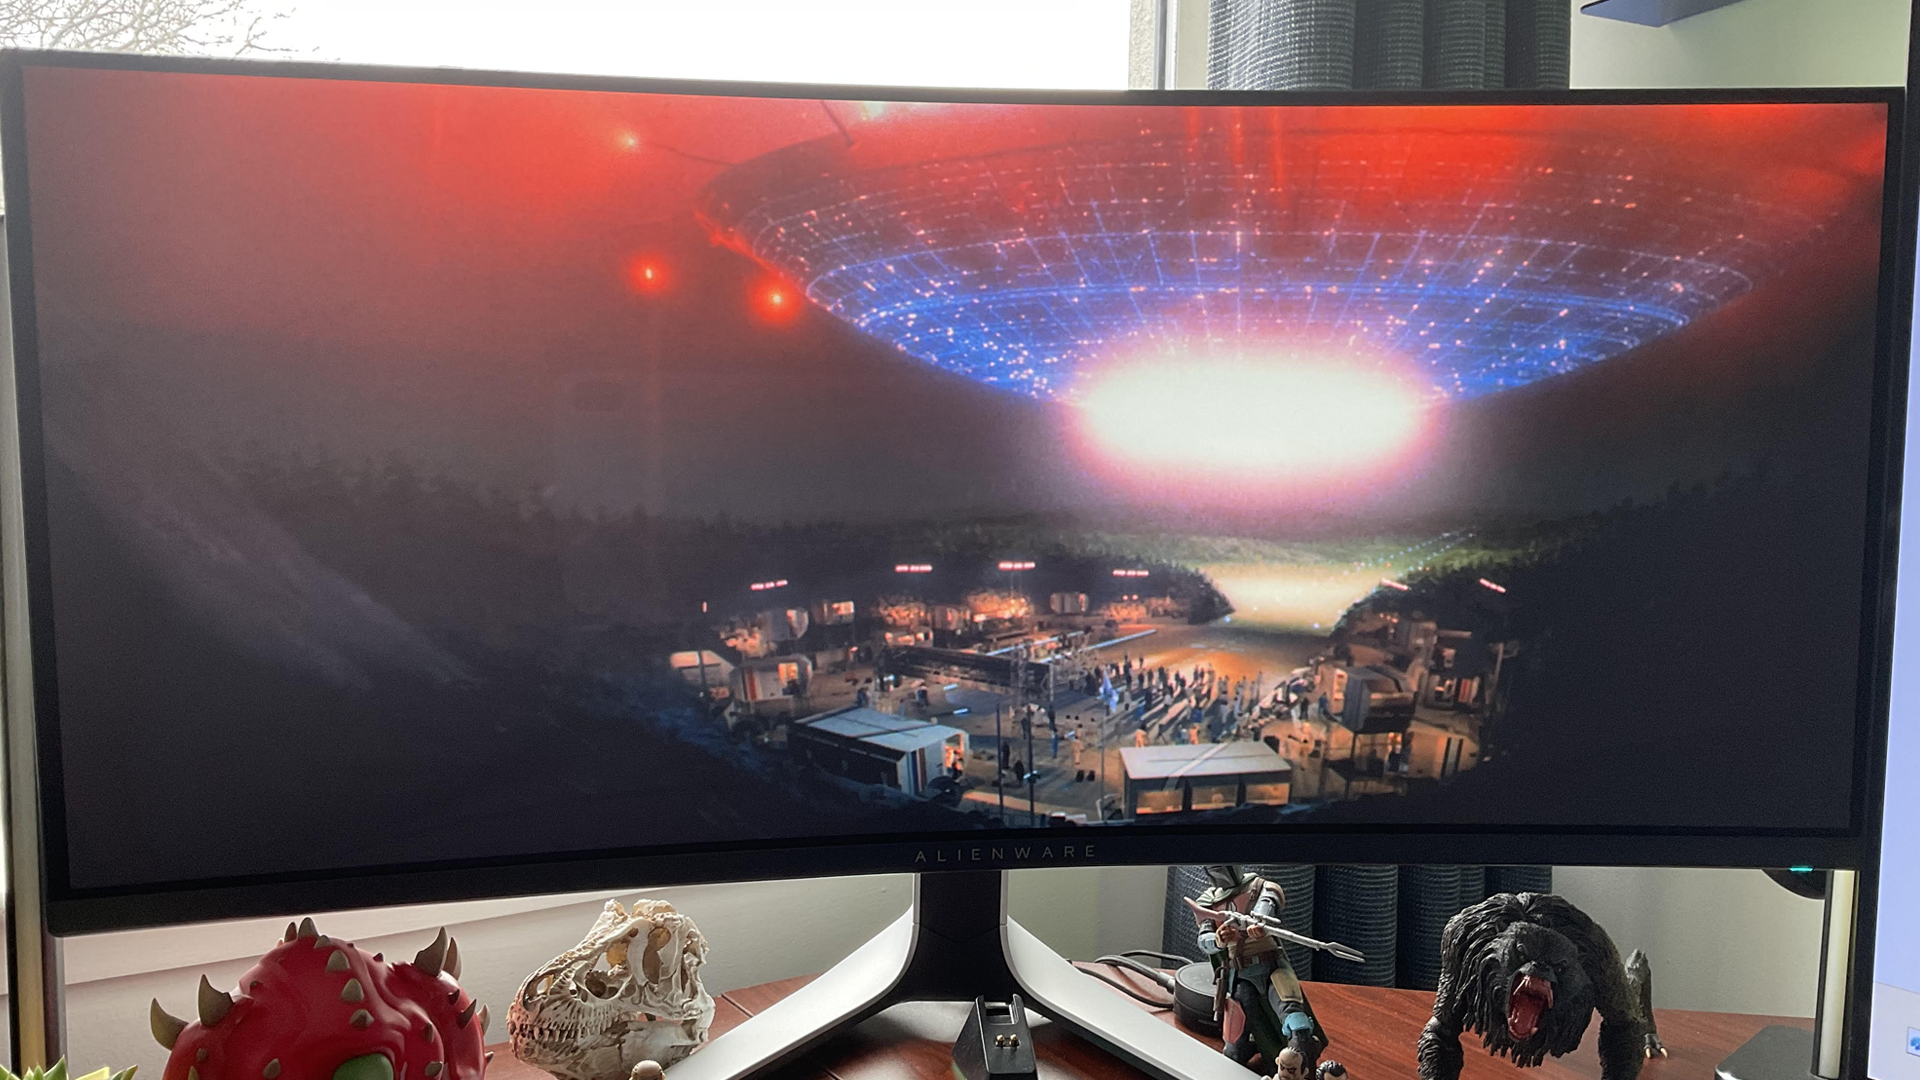 Alienware AW3423DW ultrawide monitor playing Close Encounters of the Third Kind, in a lounge